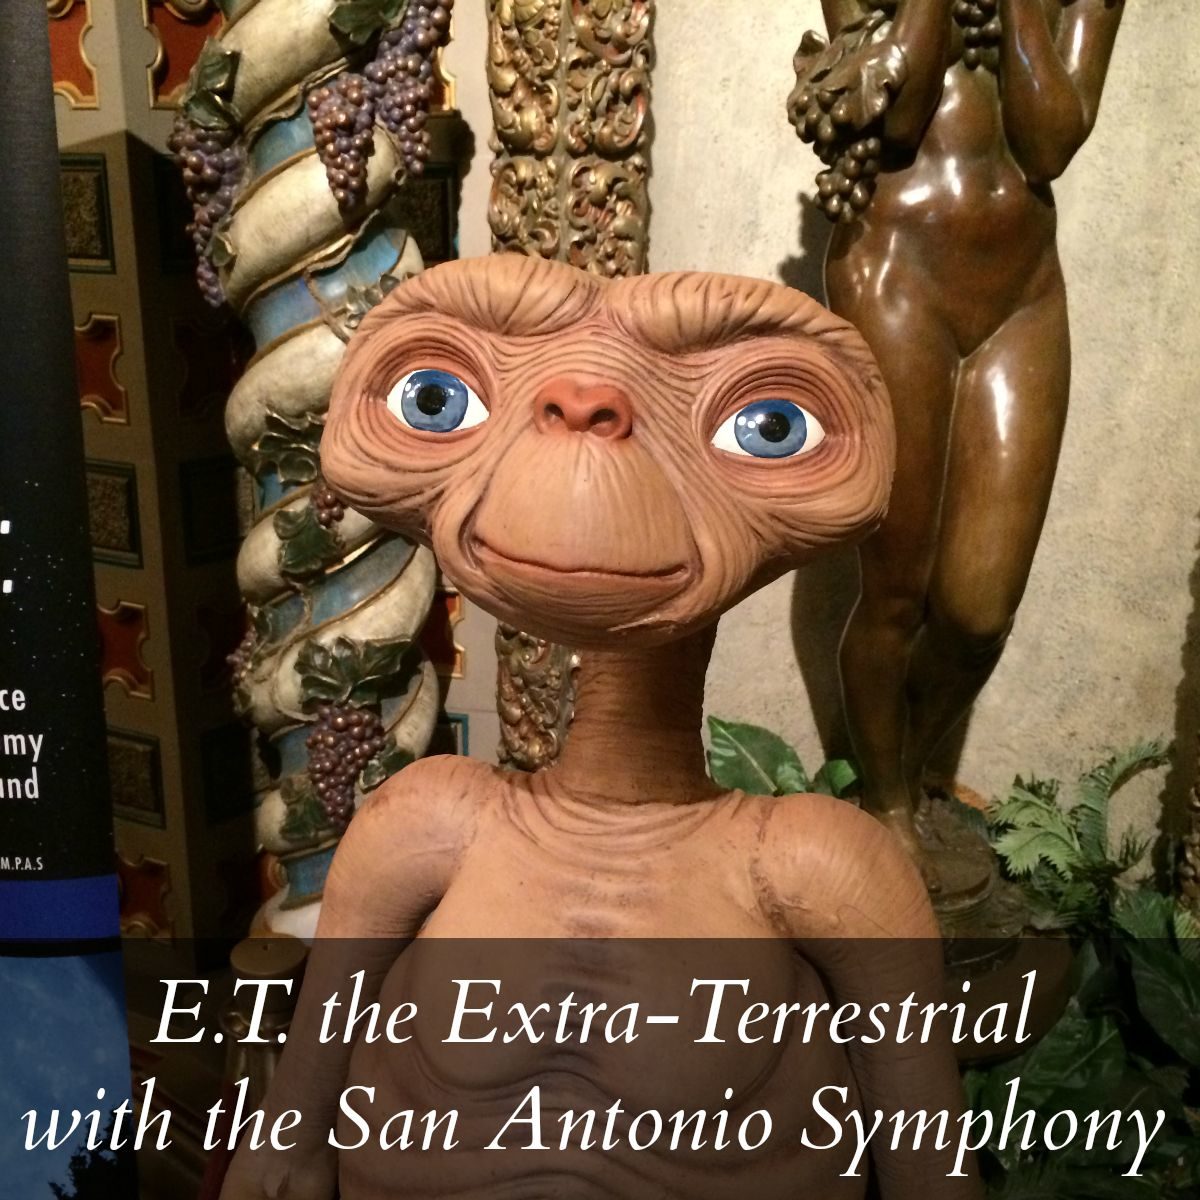 E.T. the Extra-Terrestrial with the San Antonio Symphony at the Majestic Theatre | San Antonio Charter Moms